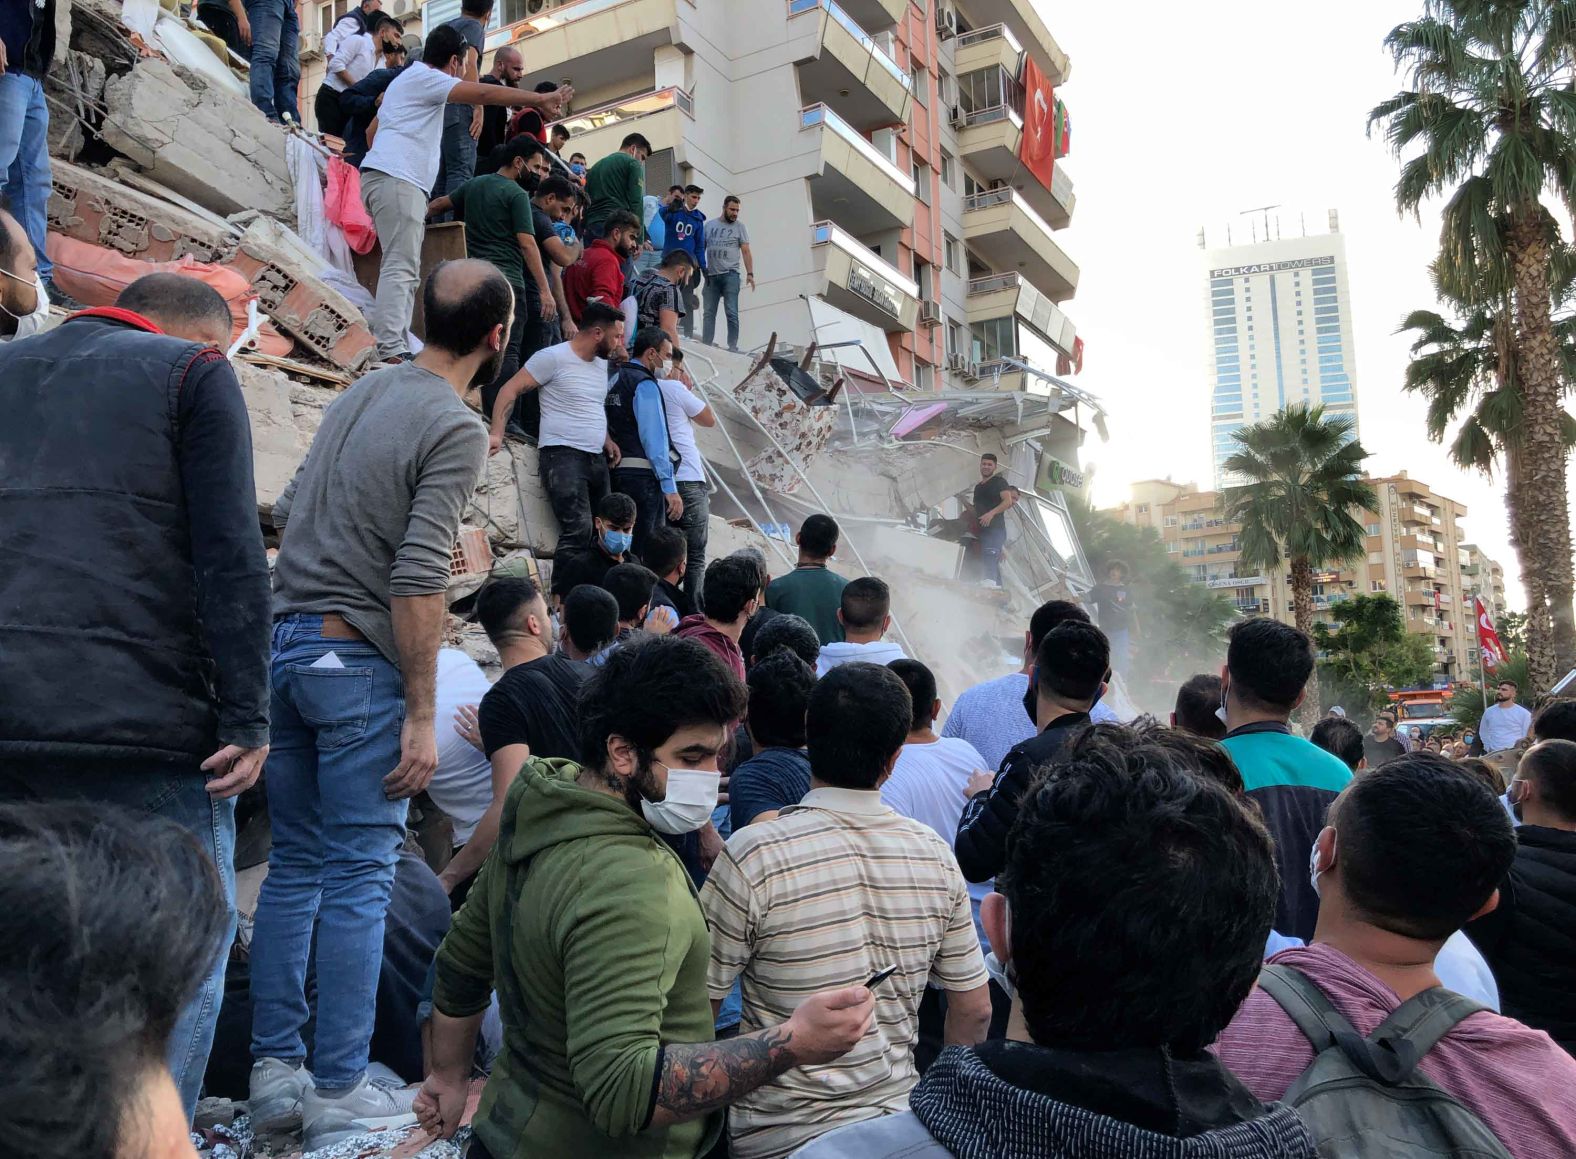 People try to save residents trapped in the debris of a collapsed building in Izmir on Friday, October 30.